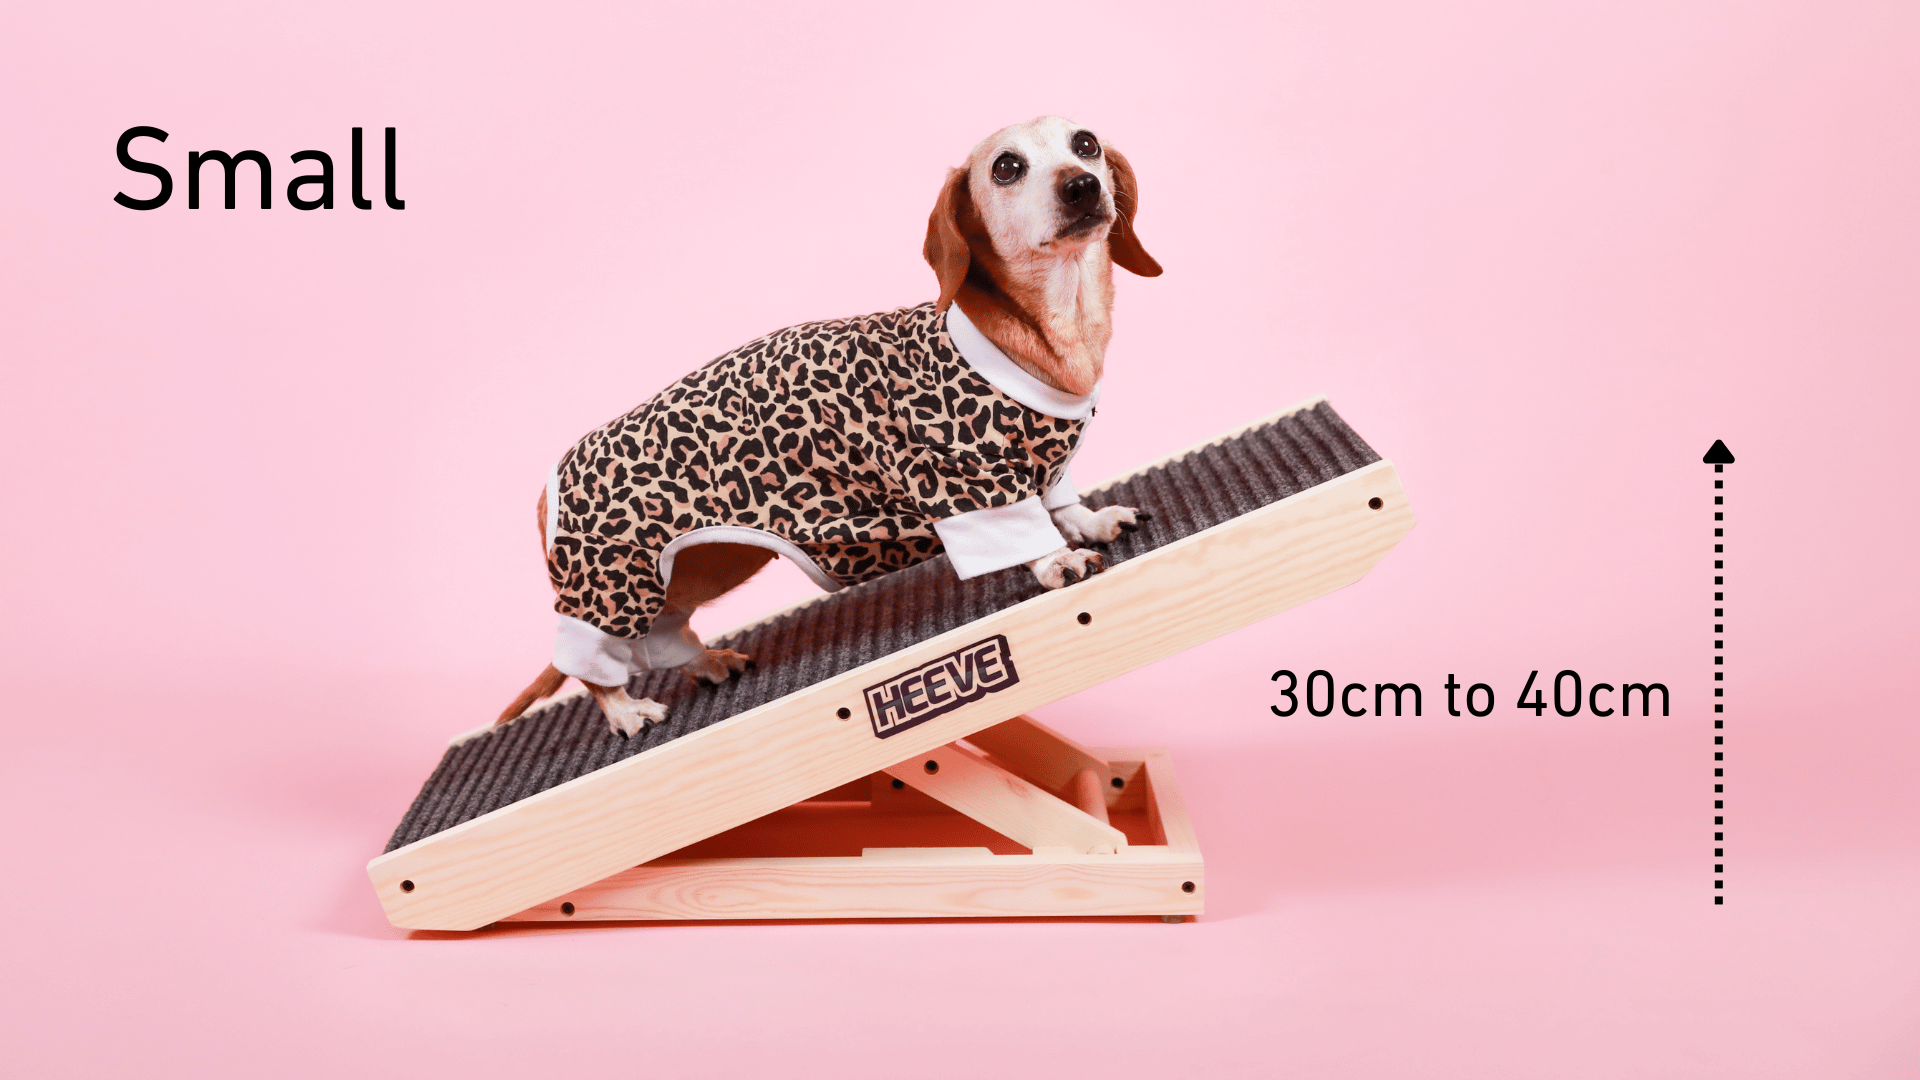 Small Heeve wooden dog ramp with dog on a pink backdrop